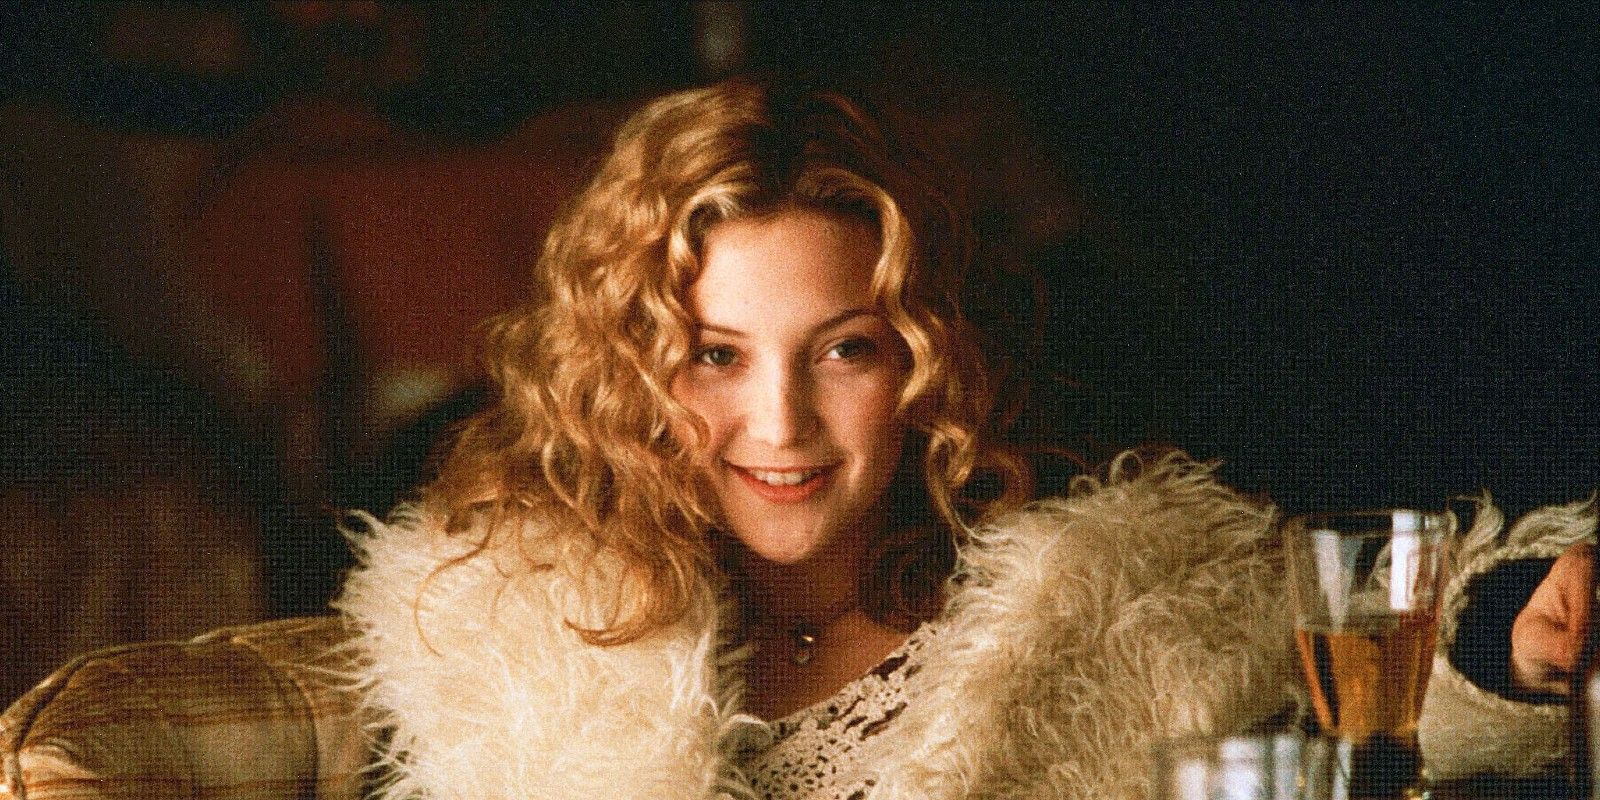 Penny Lane looks on in a fur coat from Almost Famous